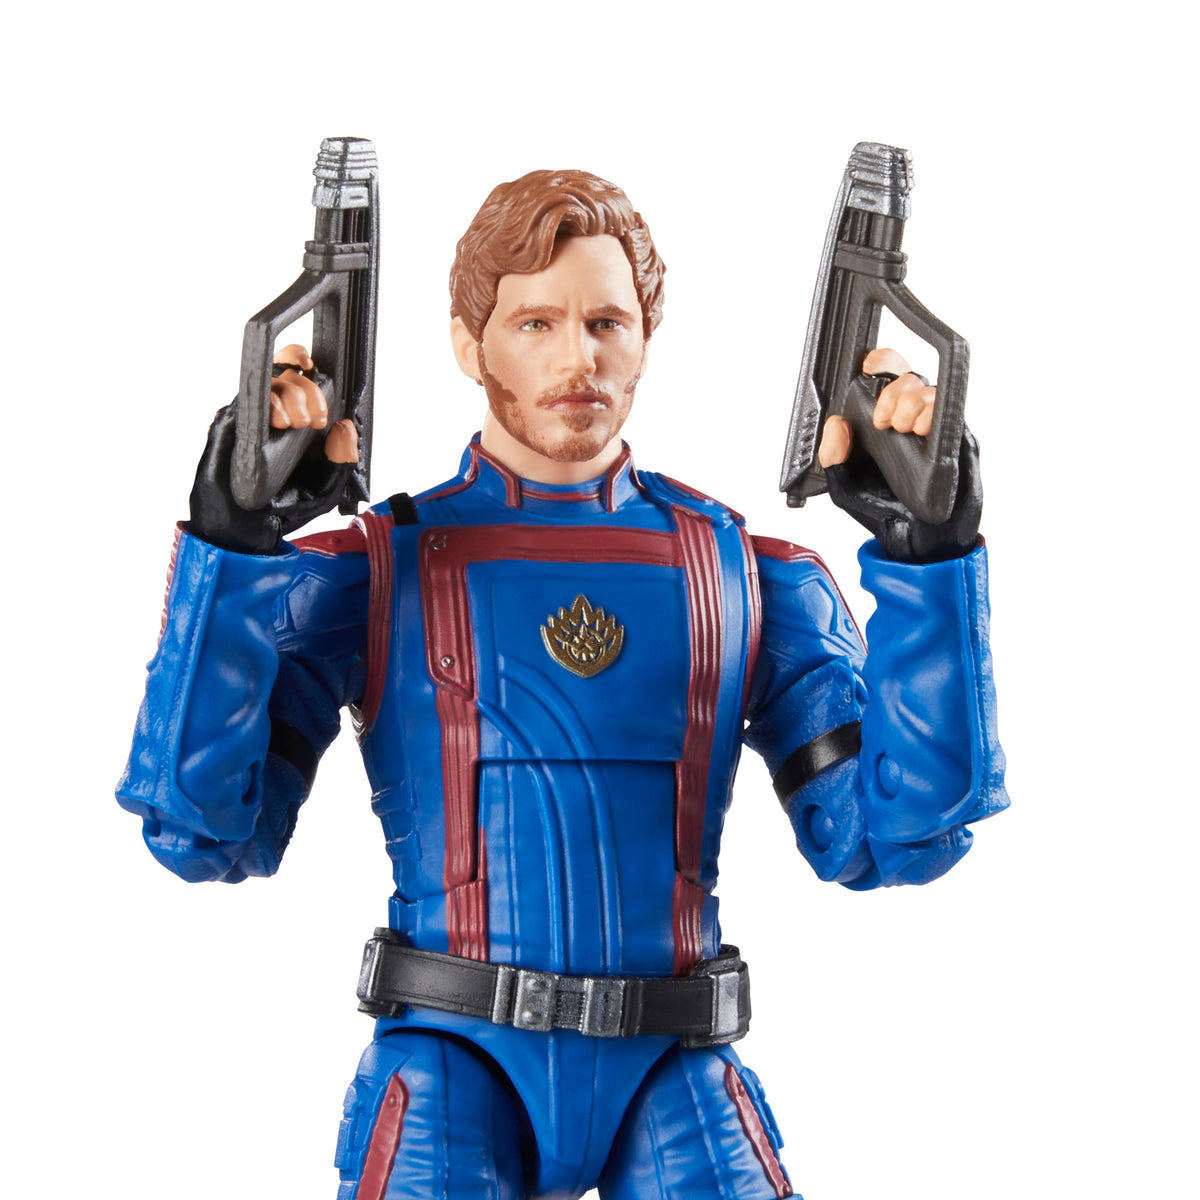  Marvel Guardians of the Galaxy Legends Series Star